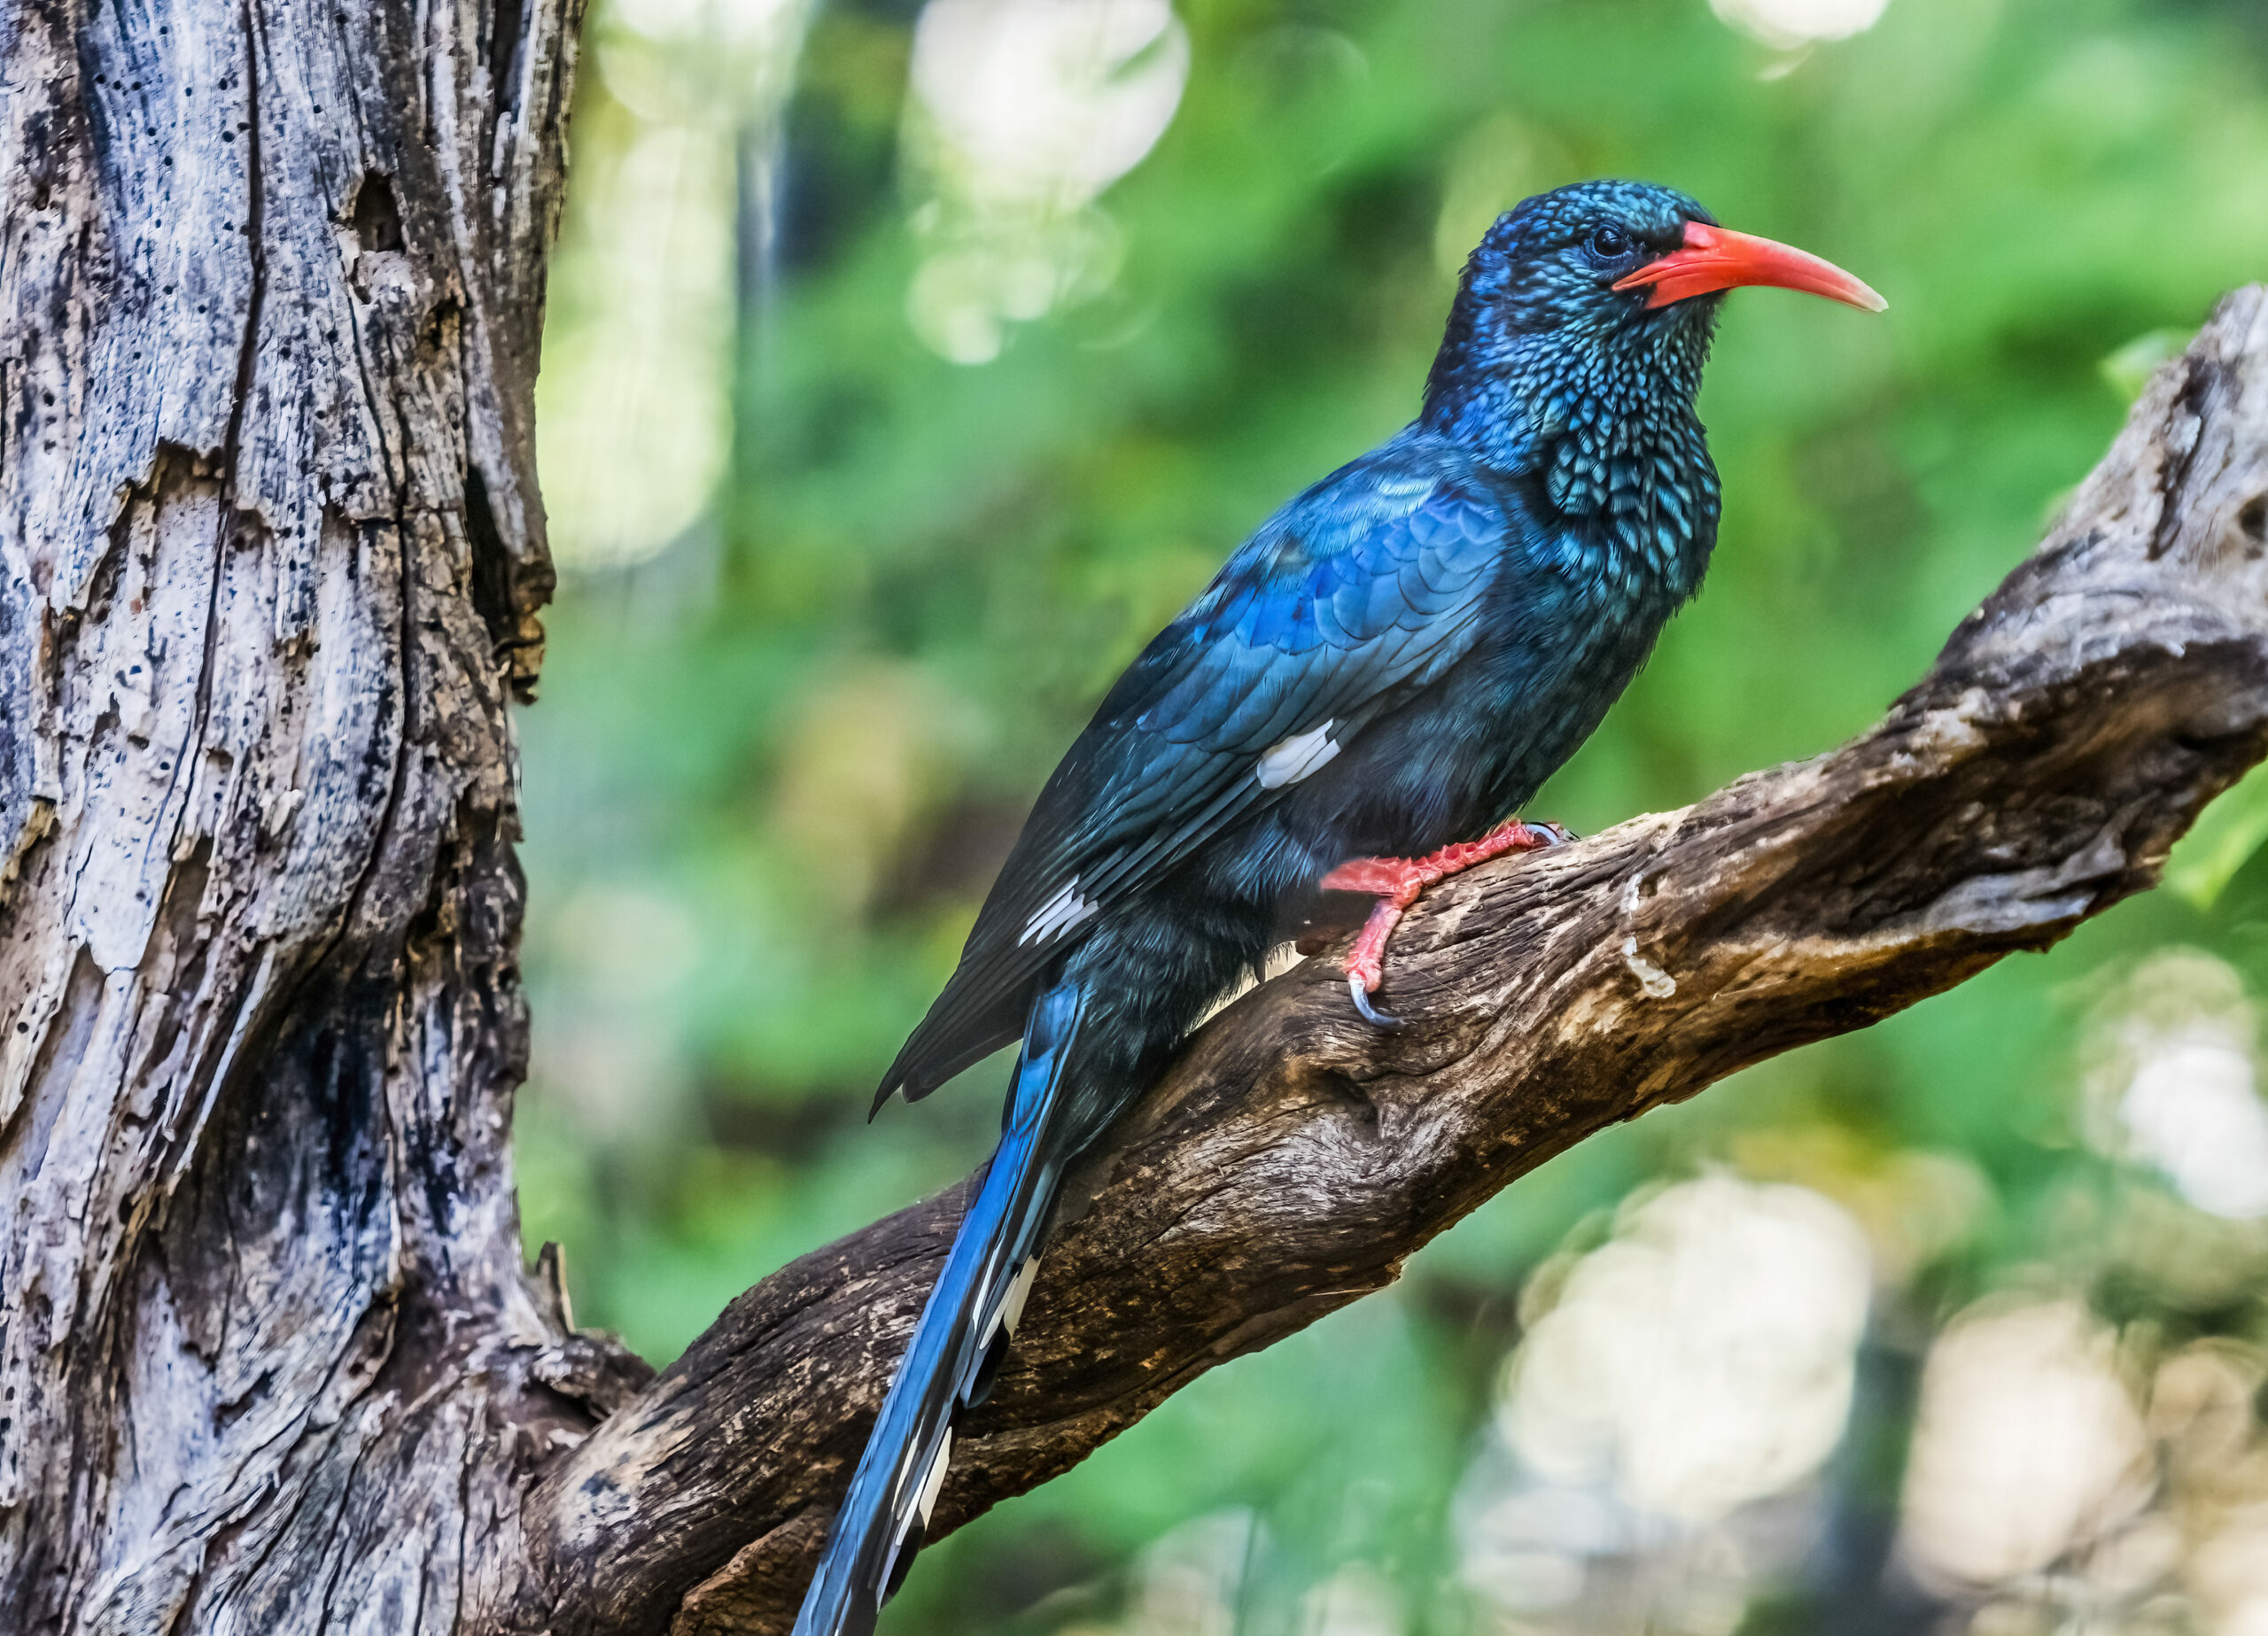 A Green Woodhoopoe sitting on a small tree branch.